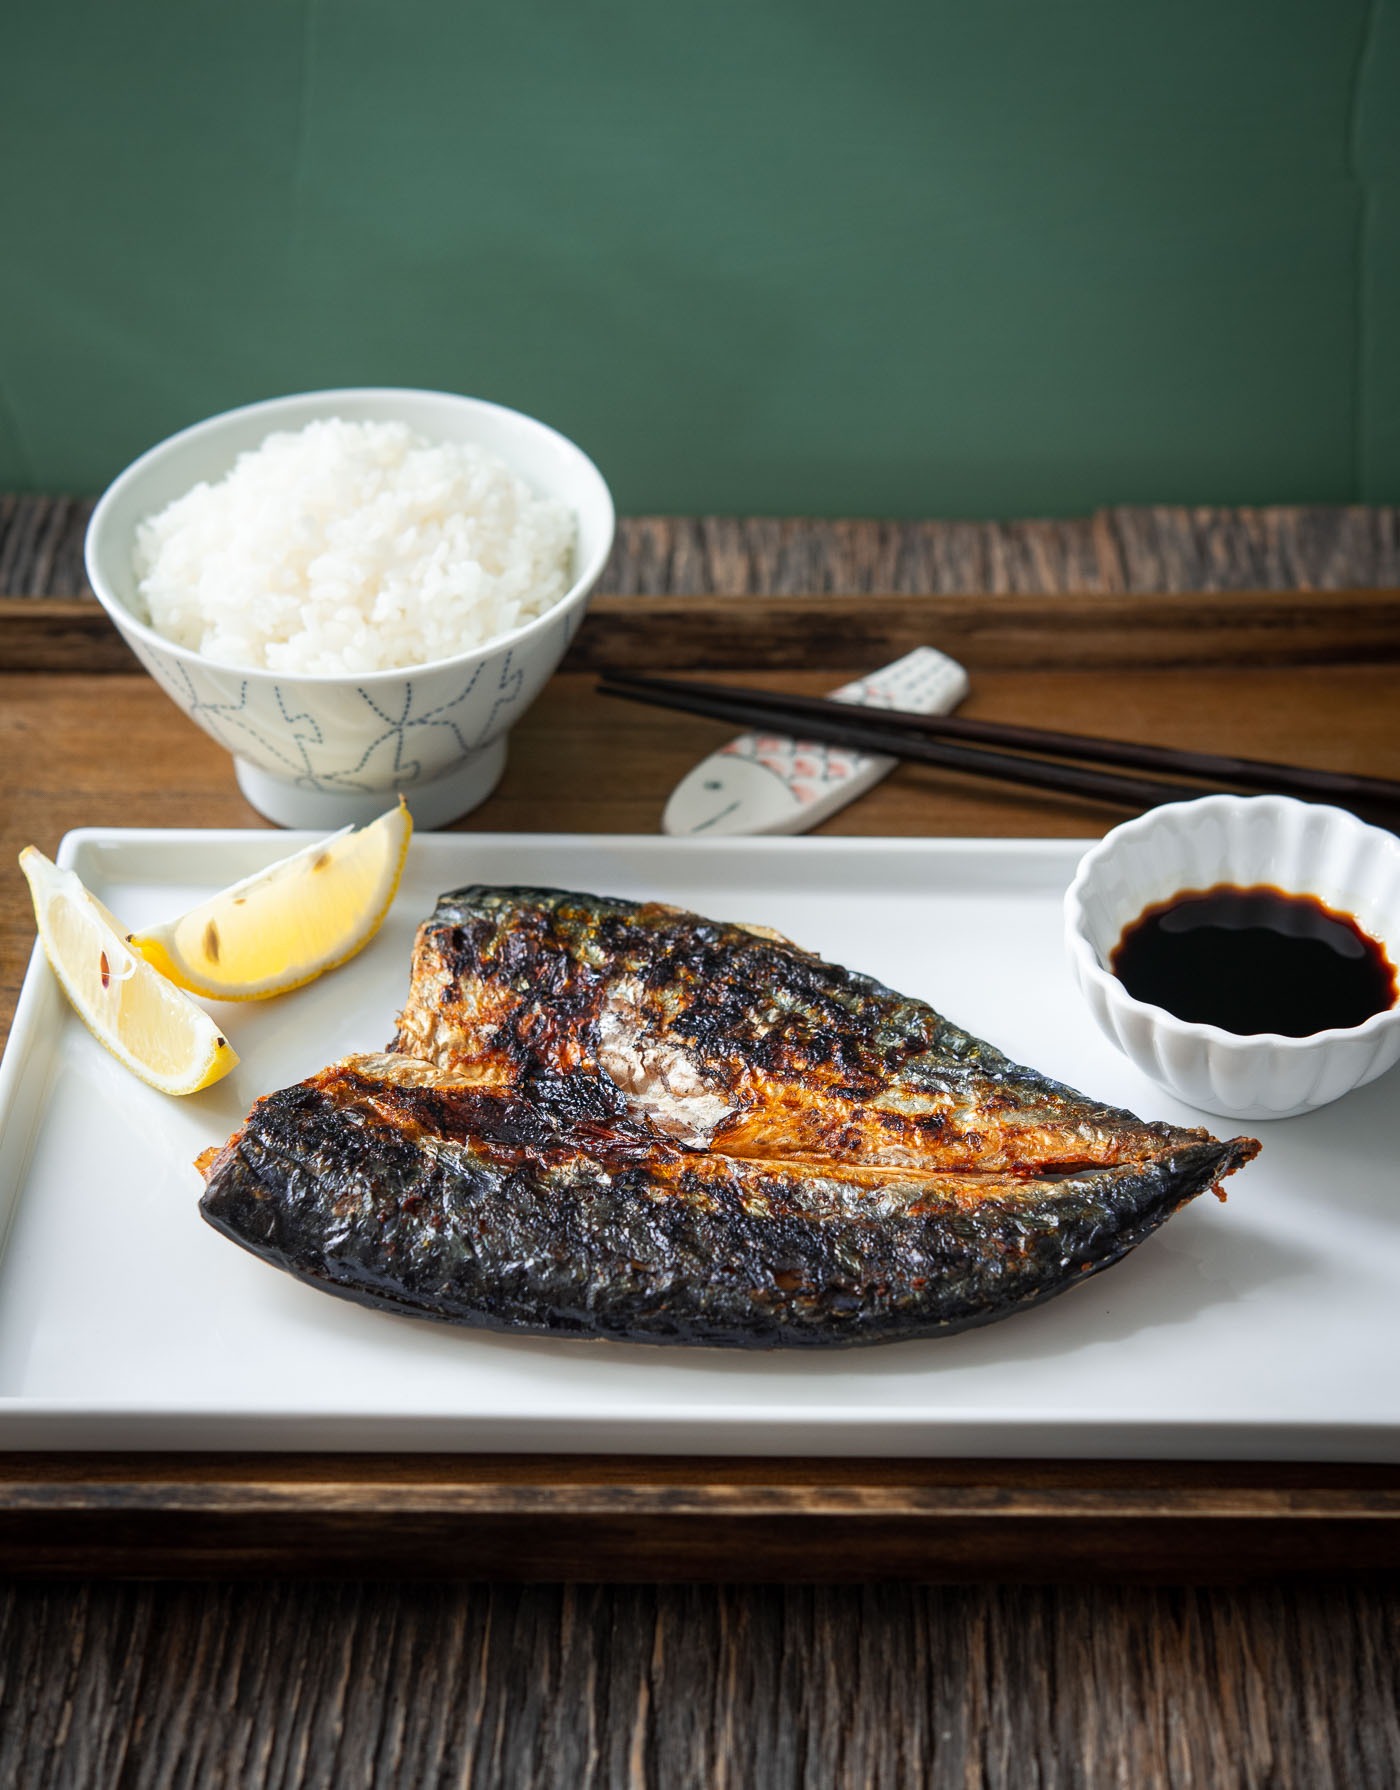 Pan-grilled mackerel fish is on a plate with soy sauce and lemon wedges, and served with rice